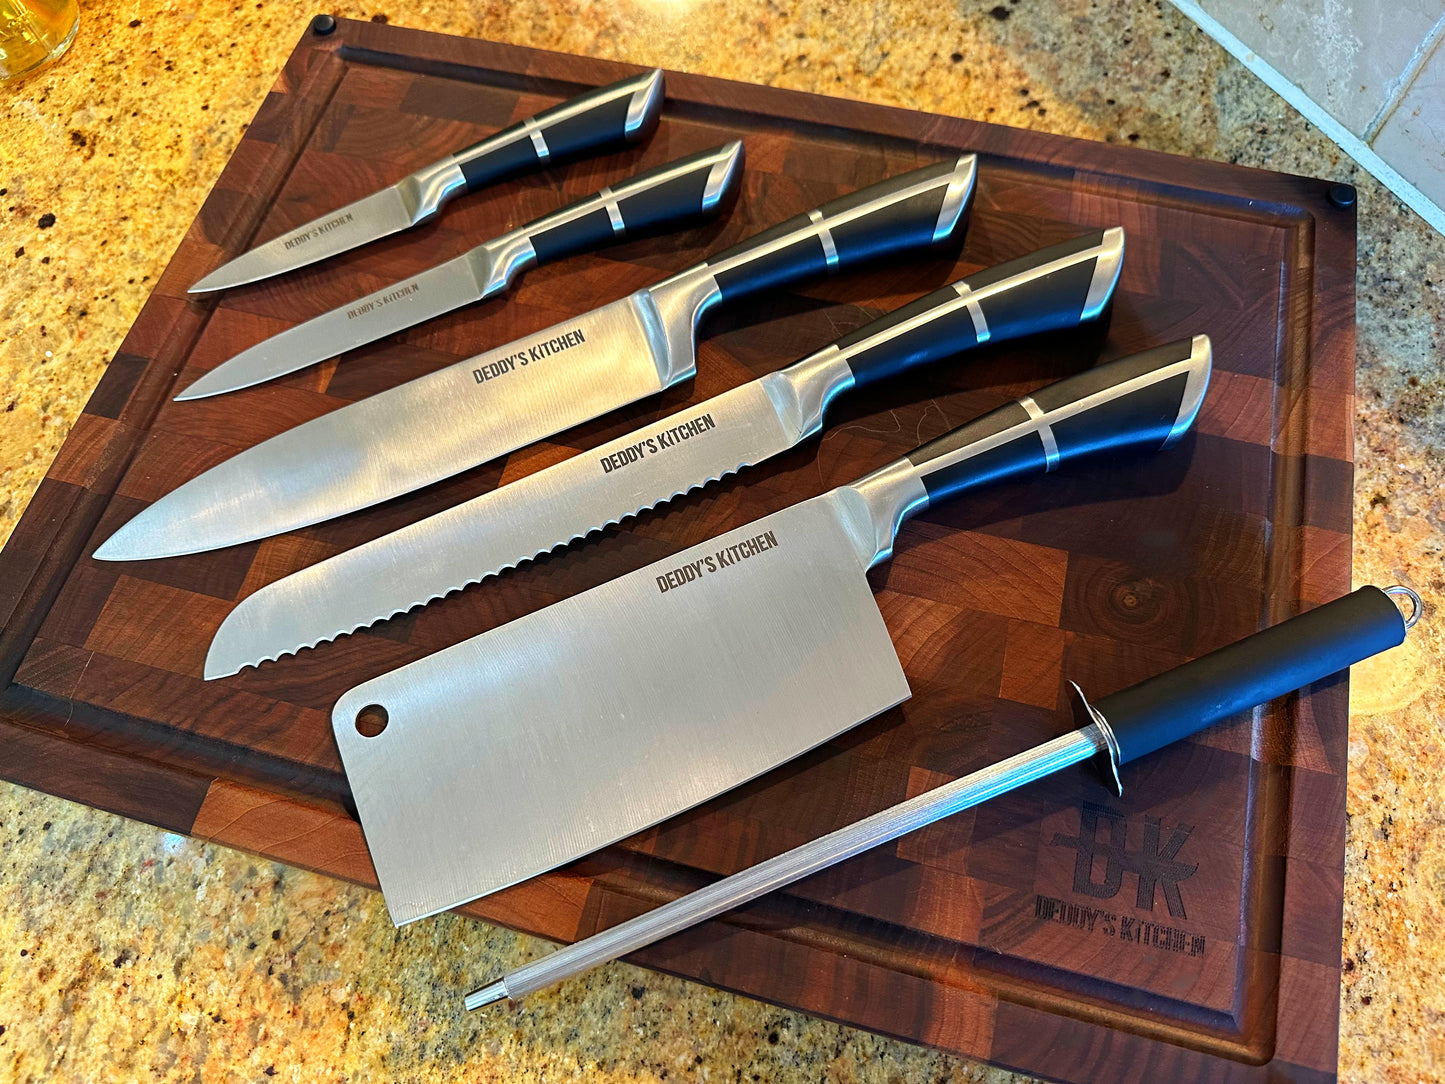 Obsessing over my new kitchen knife set 🥹 #kitchenfinds #